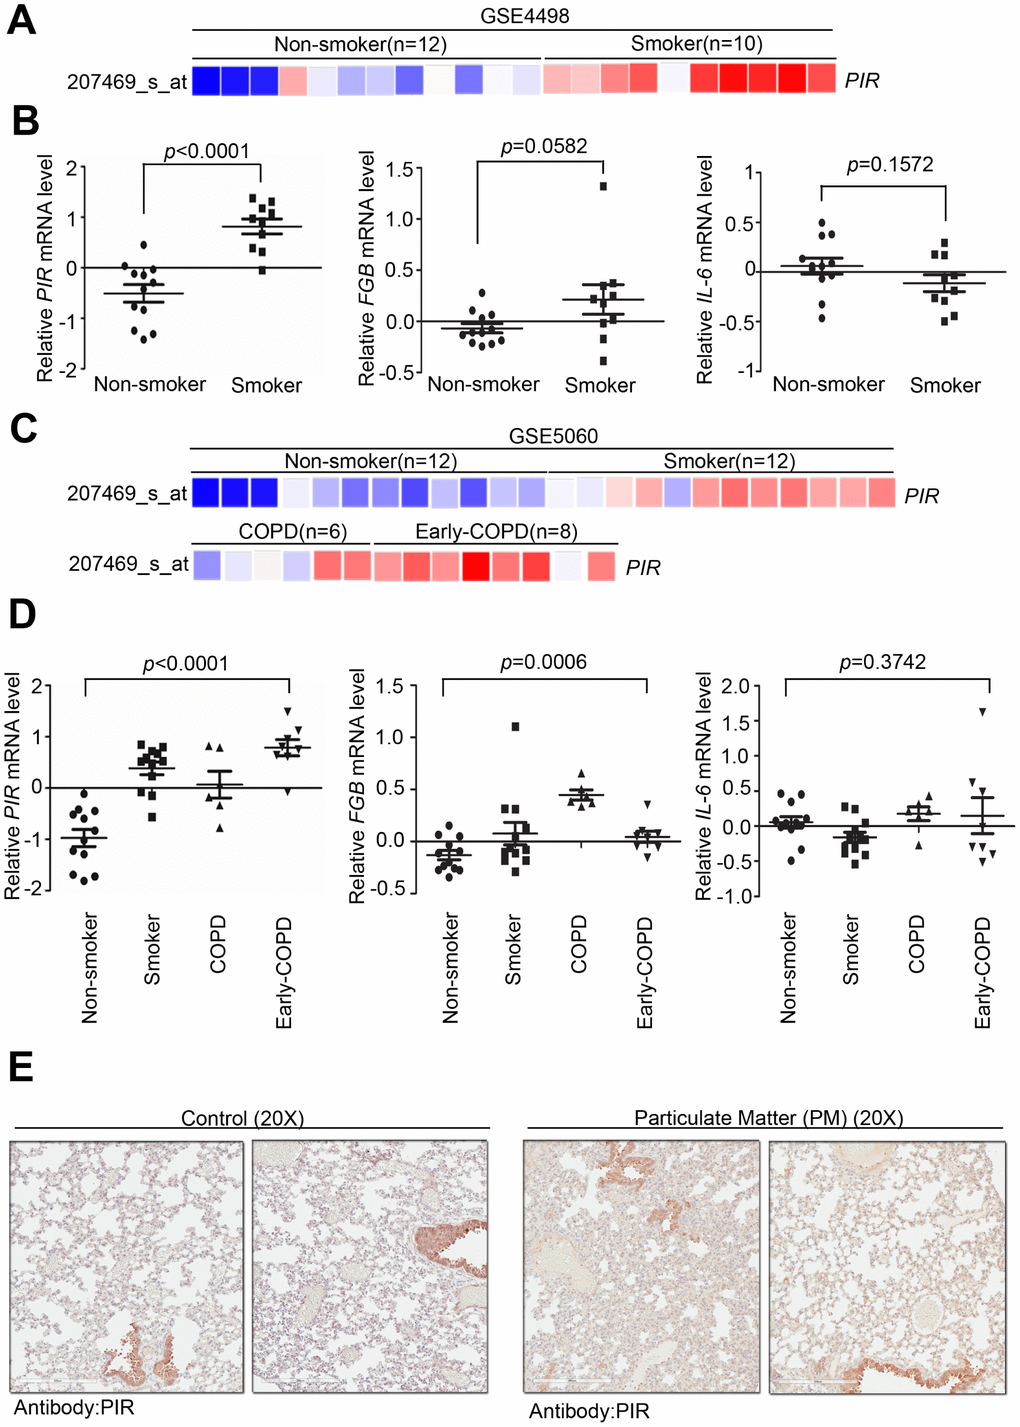 Overexpression of PIR correlates with smoke and early COPD. (A) Detailed heatmap highlights the correlation between the mRNA expression level of PIR and smoke in the GSE4498 cohort (n = 22) using Oncomine online analysis tool. (B) Differential mRNA levels of PIR, FBG, and IL-6 between non-smoker and smoker in the GSE4498 cohort. (C) Detailed heatmaps highlight the correlation between the mRNA expression levels of PIR and non-smoker, smoker, COPD, and early COPD in the GSE5060 cohort (n = 38) using Oncomine online analysis tool. (D) Differential mRNA levels of PIR, FBG, and IL-6 in non-smoker, smoker, COPD, and early COPD in the GSE5060 cohort (n = 38) in the analysis by the Oncomine online analysis tool. (E) The immunohistochemical staining results showed PM-fed mice group had higher concentration of the PIR protein in the lung tissue.